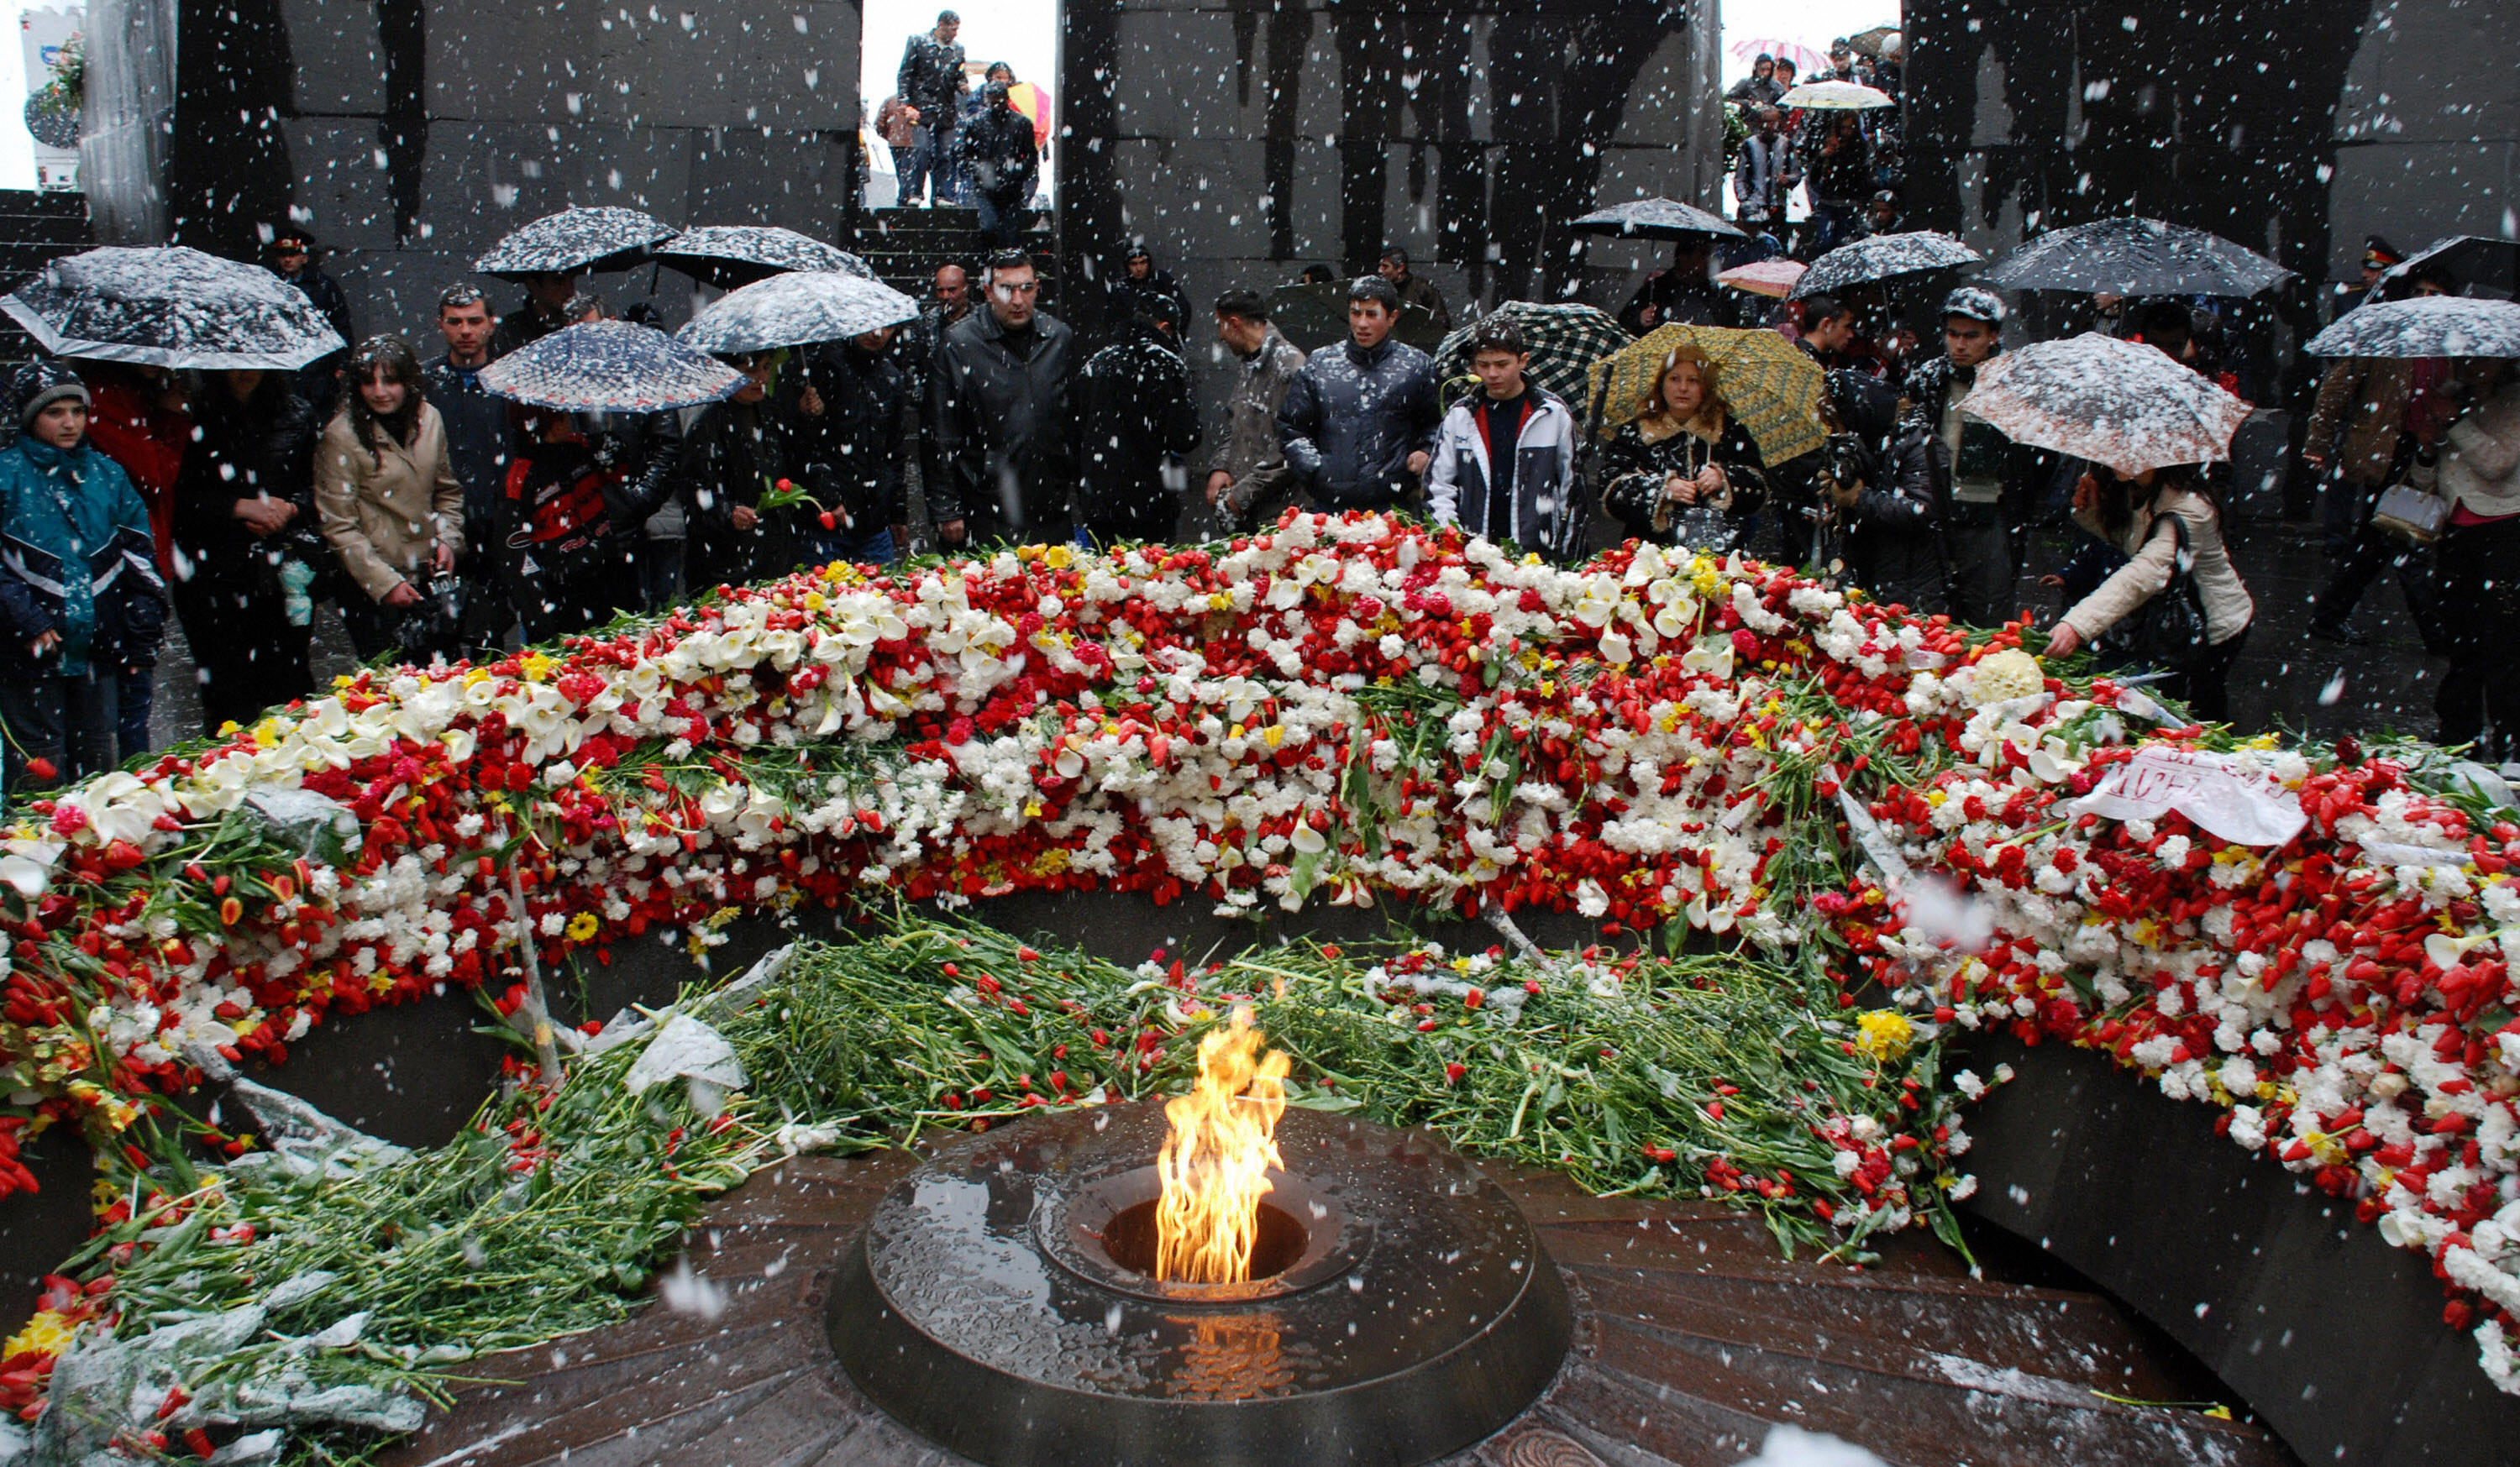 THE PASSIVE CONDONING OF THE ARMENIAN GENOCIDE